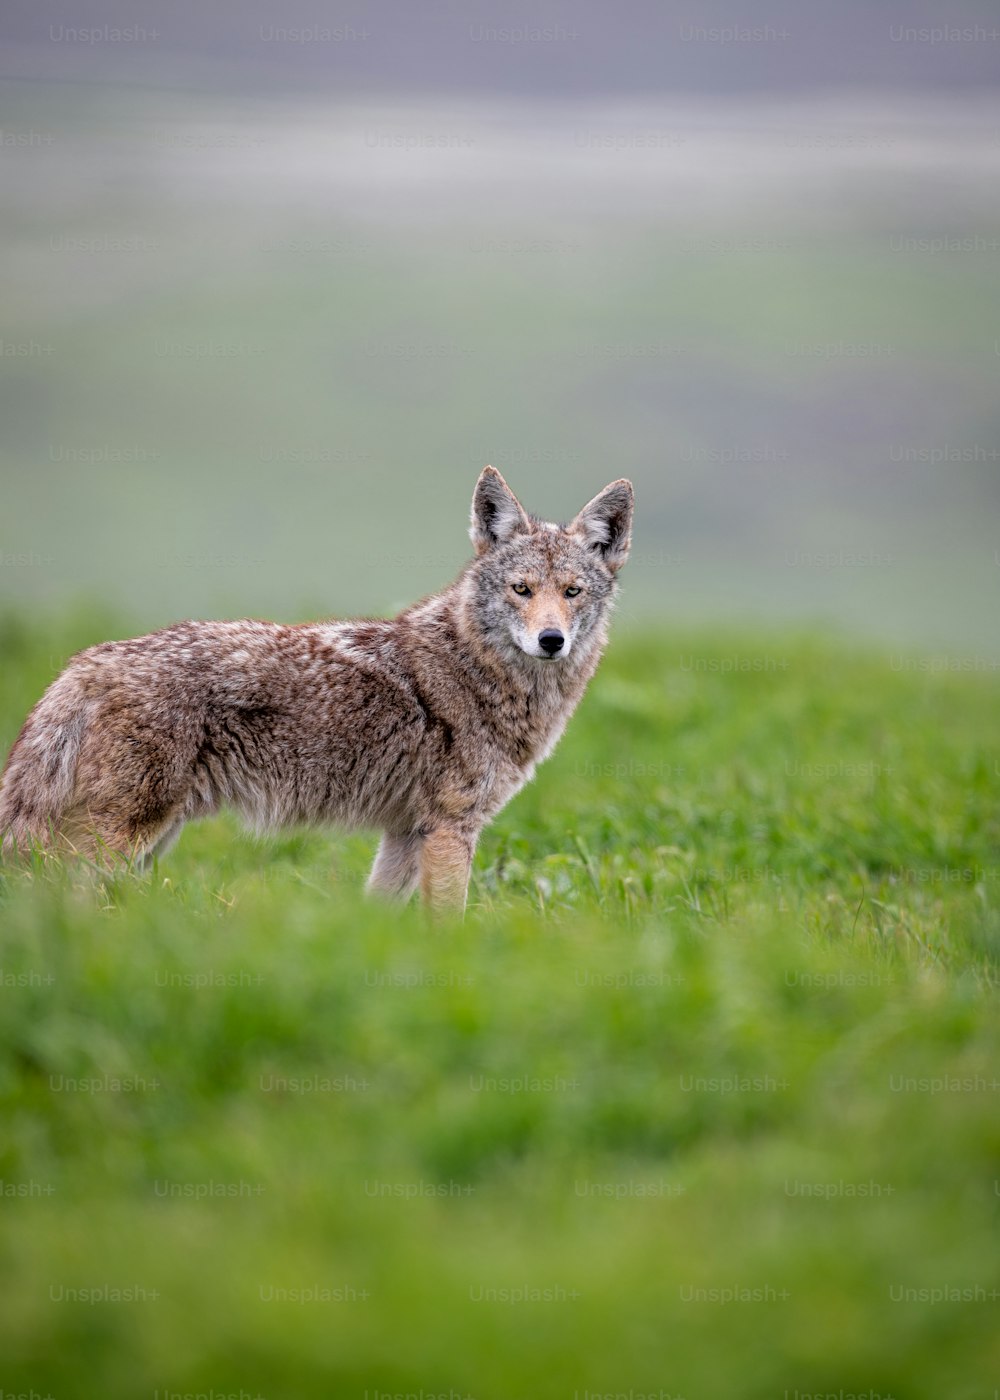 a lone wolf standing in a grassy field